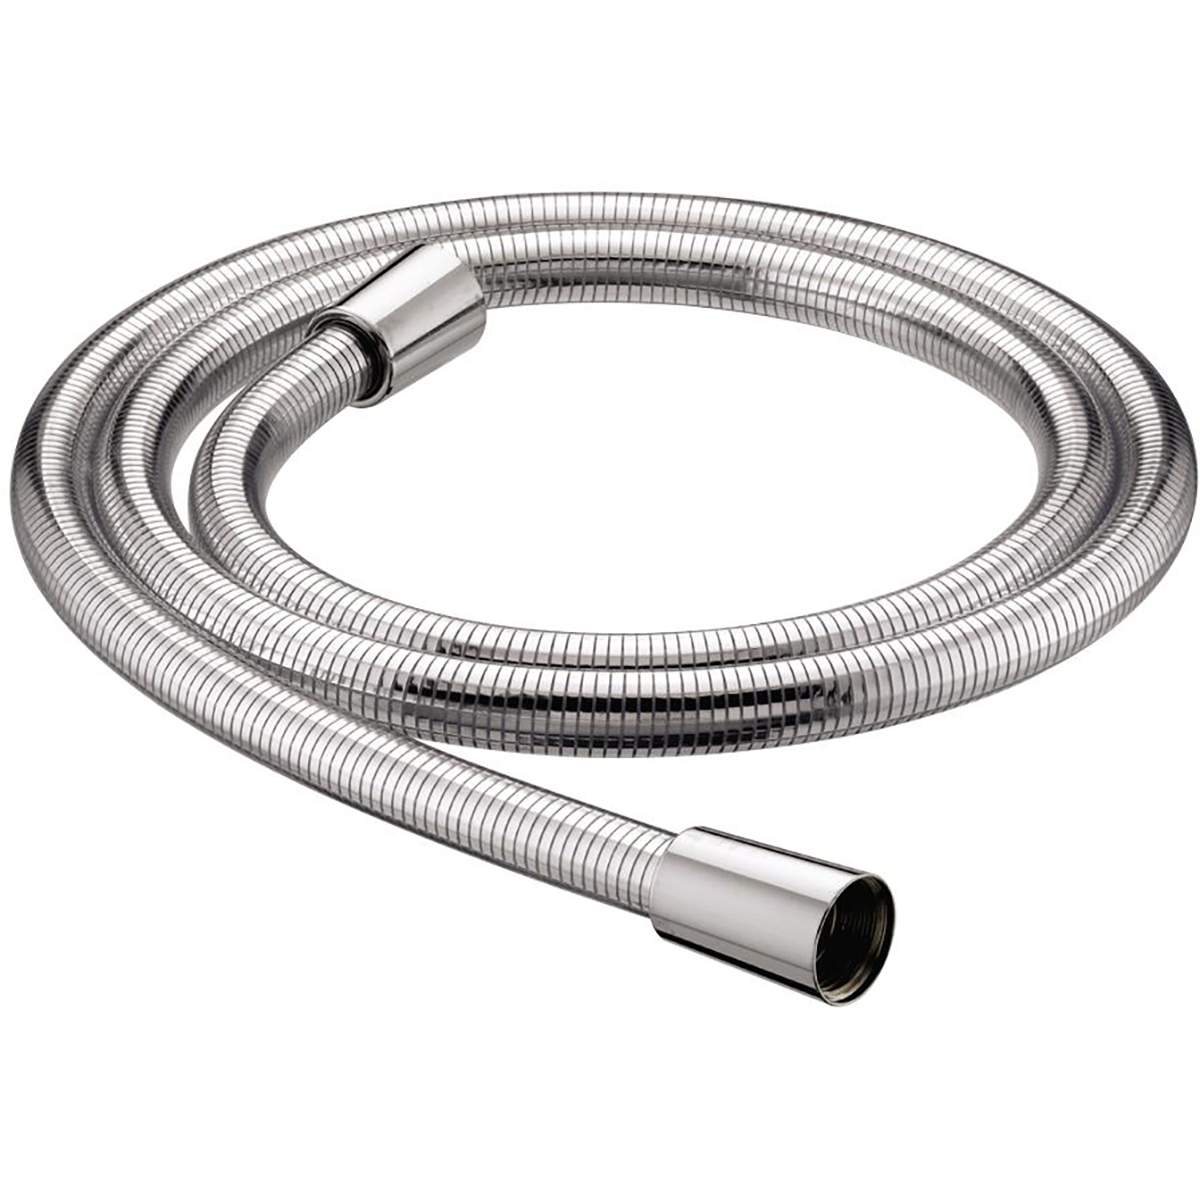 Bristan 1.5m Cone to Cone Easy Clean Shower Hose with 8mm Bore (HOS 150CCE01 C)